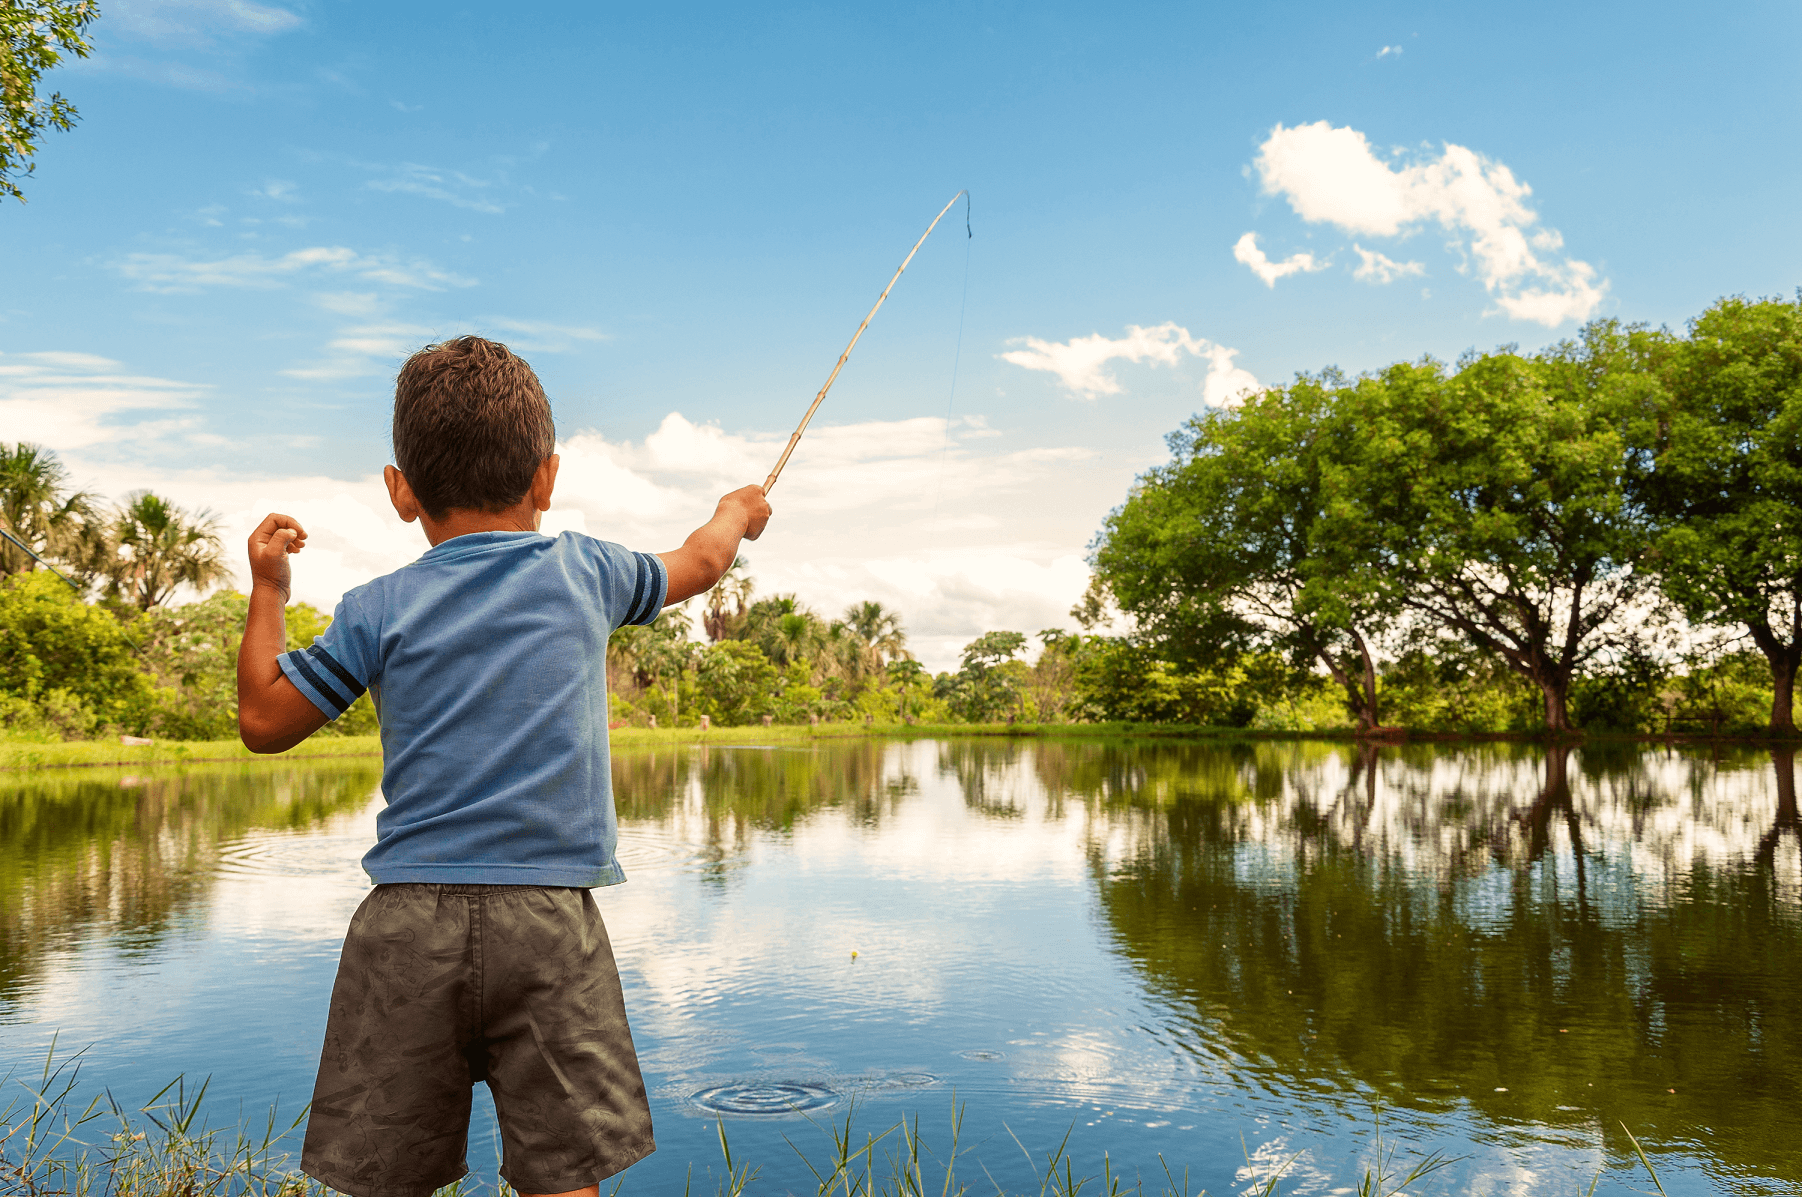 Catch a fish at D'Best Fishing Pond